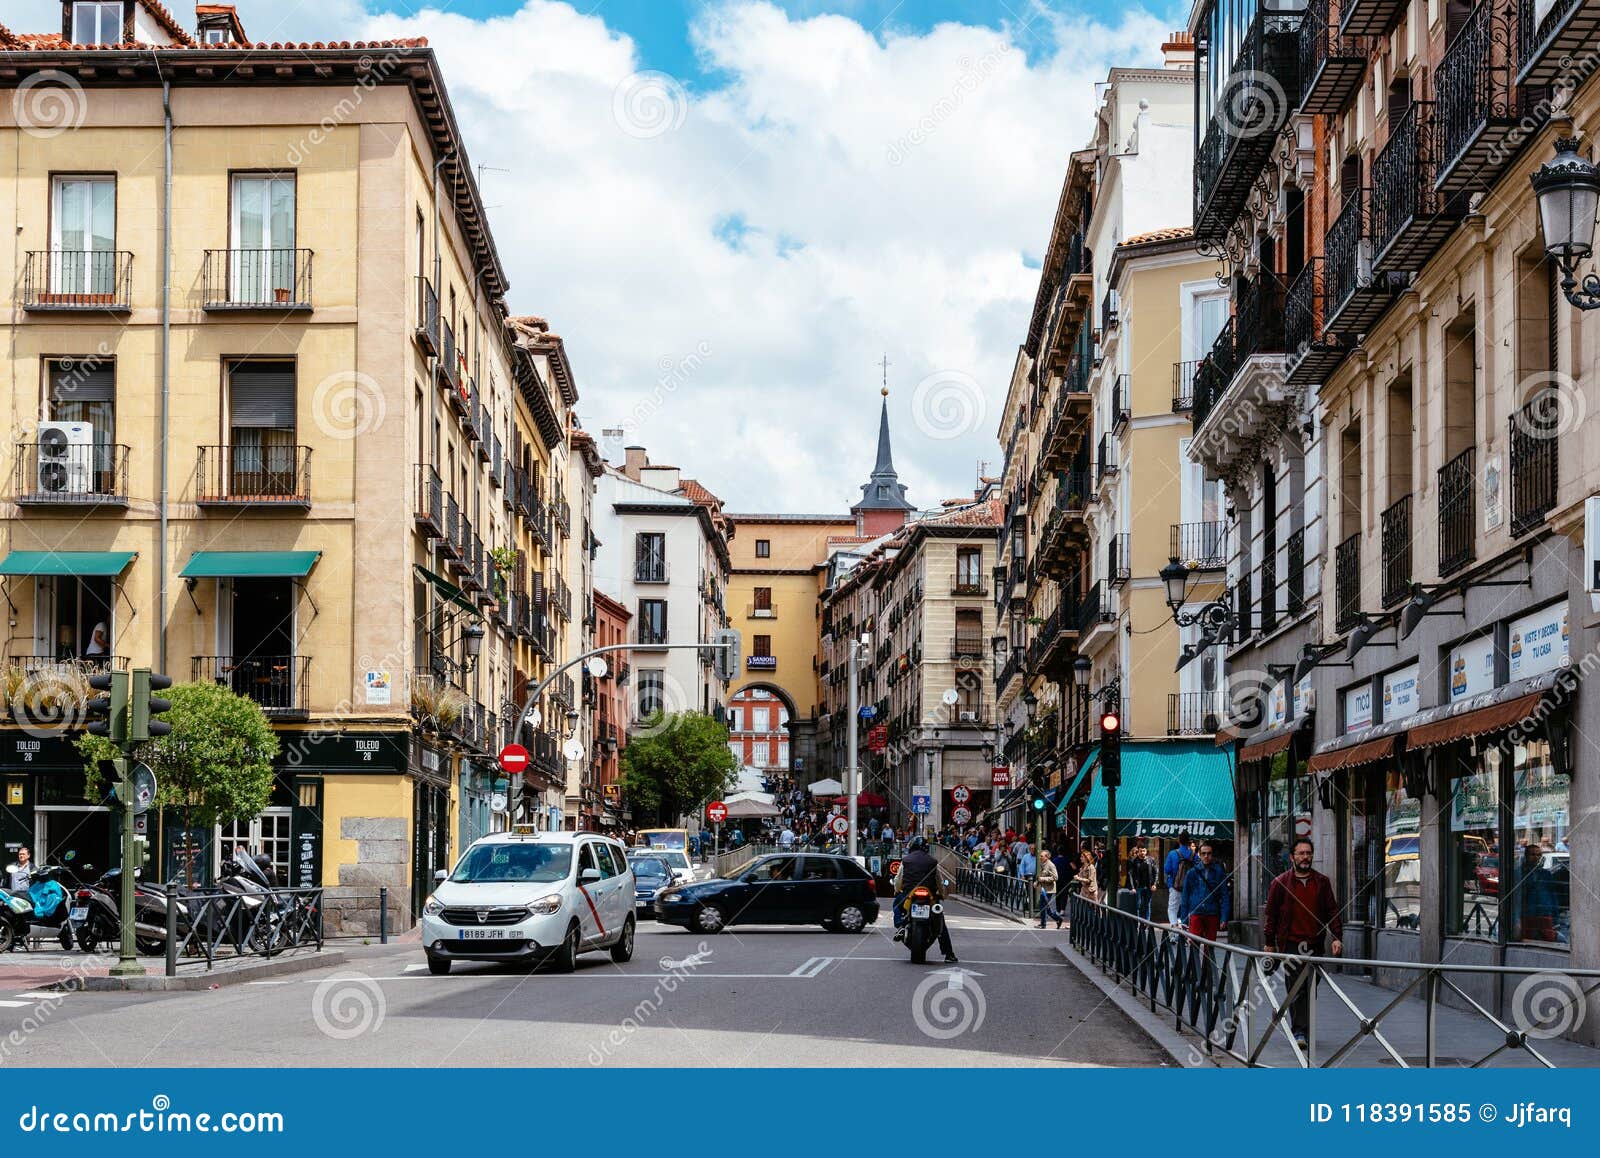 View Of Toledo Street In City Centre Of Madrid Editorial Image Image Of Street City 118391585